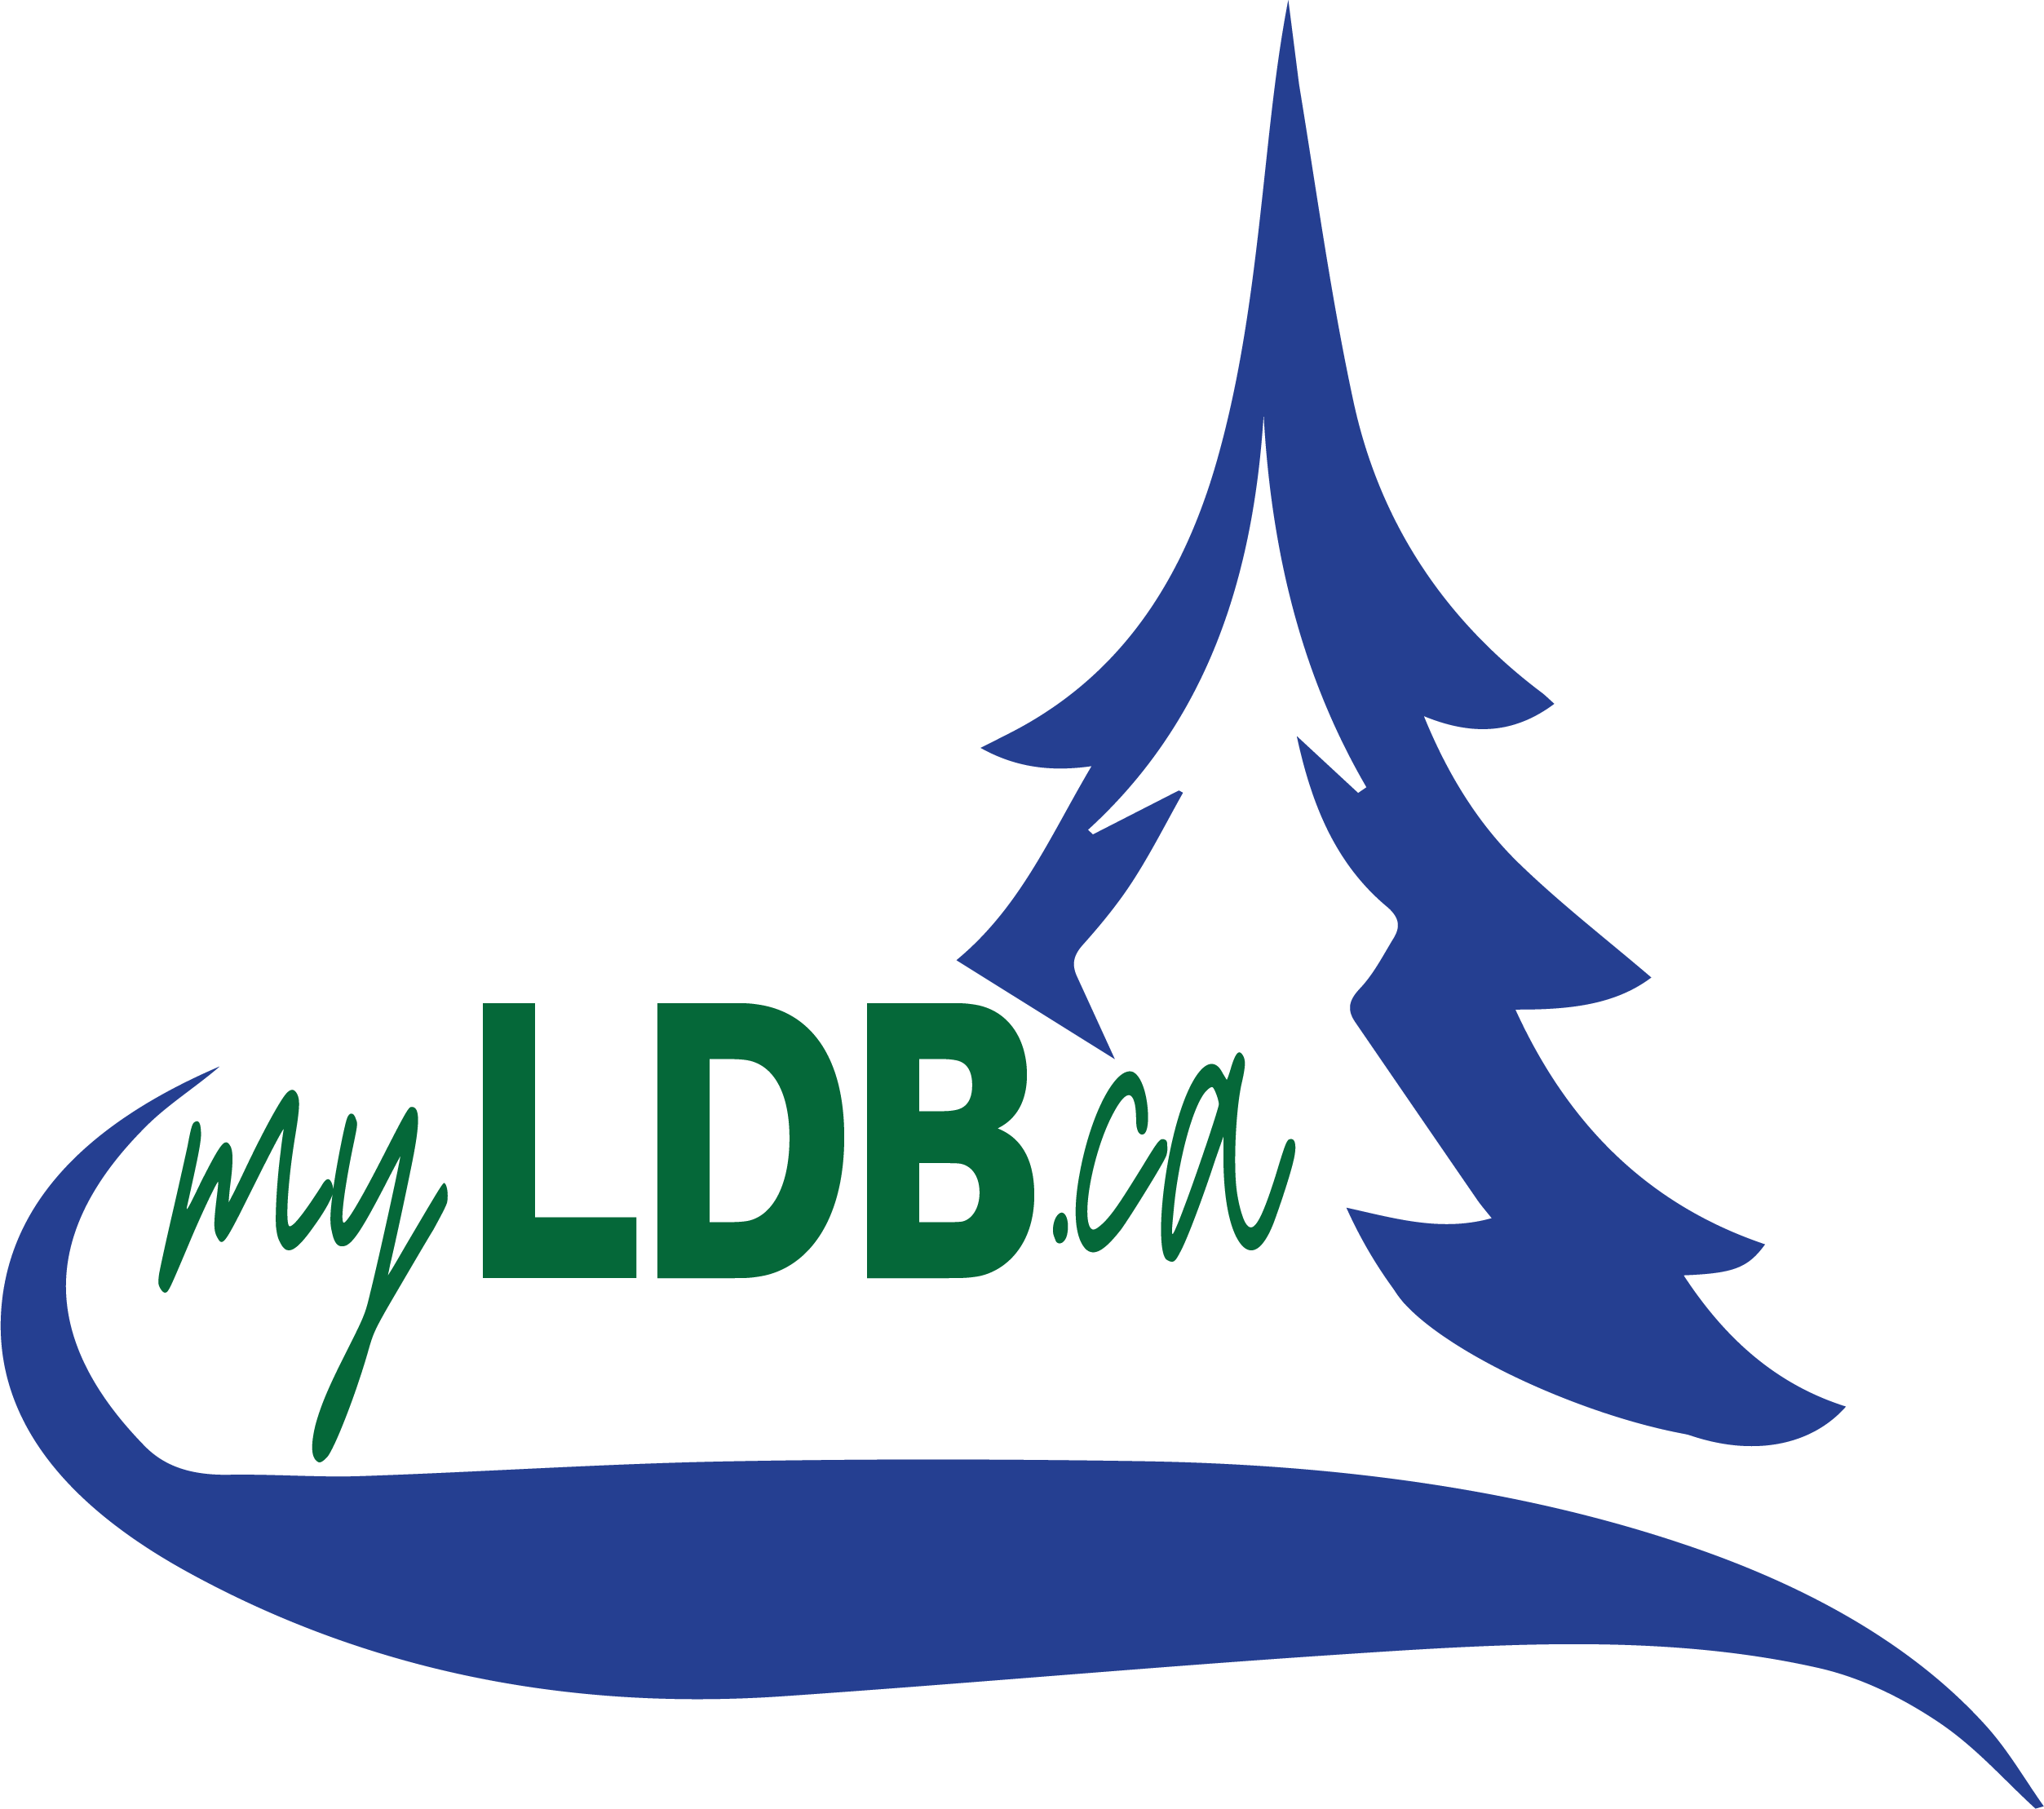 Photo of MyLdB's logo which includes in green writing the words 'My LdB dot ca'. There is also a blue tree with a white tree inside it and dark blue water under the writing.